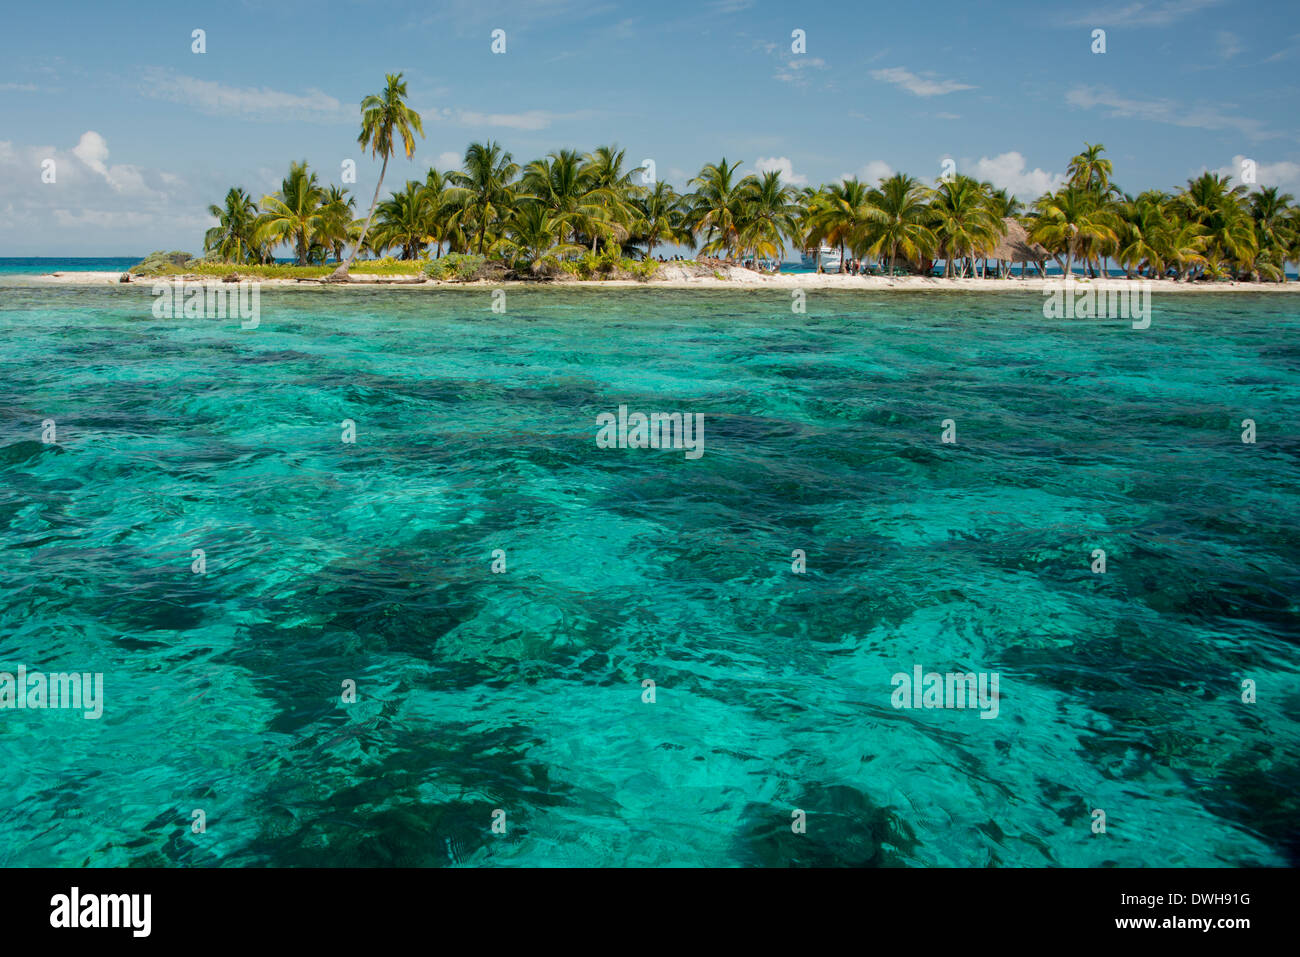 Belize, Caribbean Sea, Stann Creek District near Placencia. Laughing Bird Caye National Park located on the Belize Barrier Reef. Stock Photo